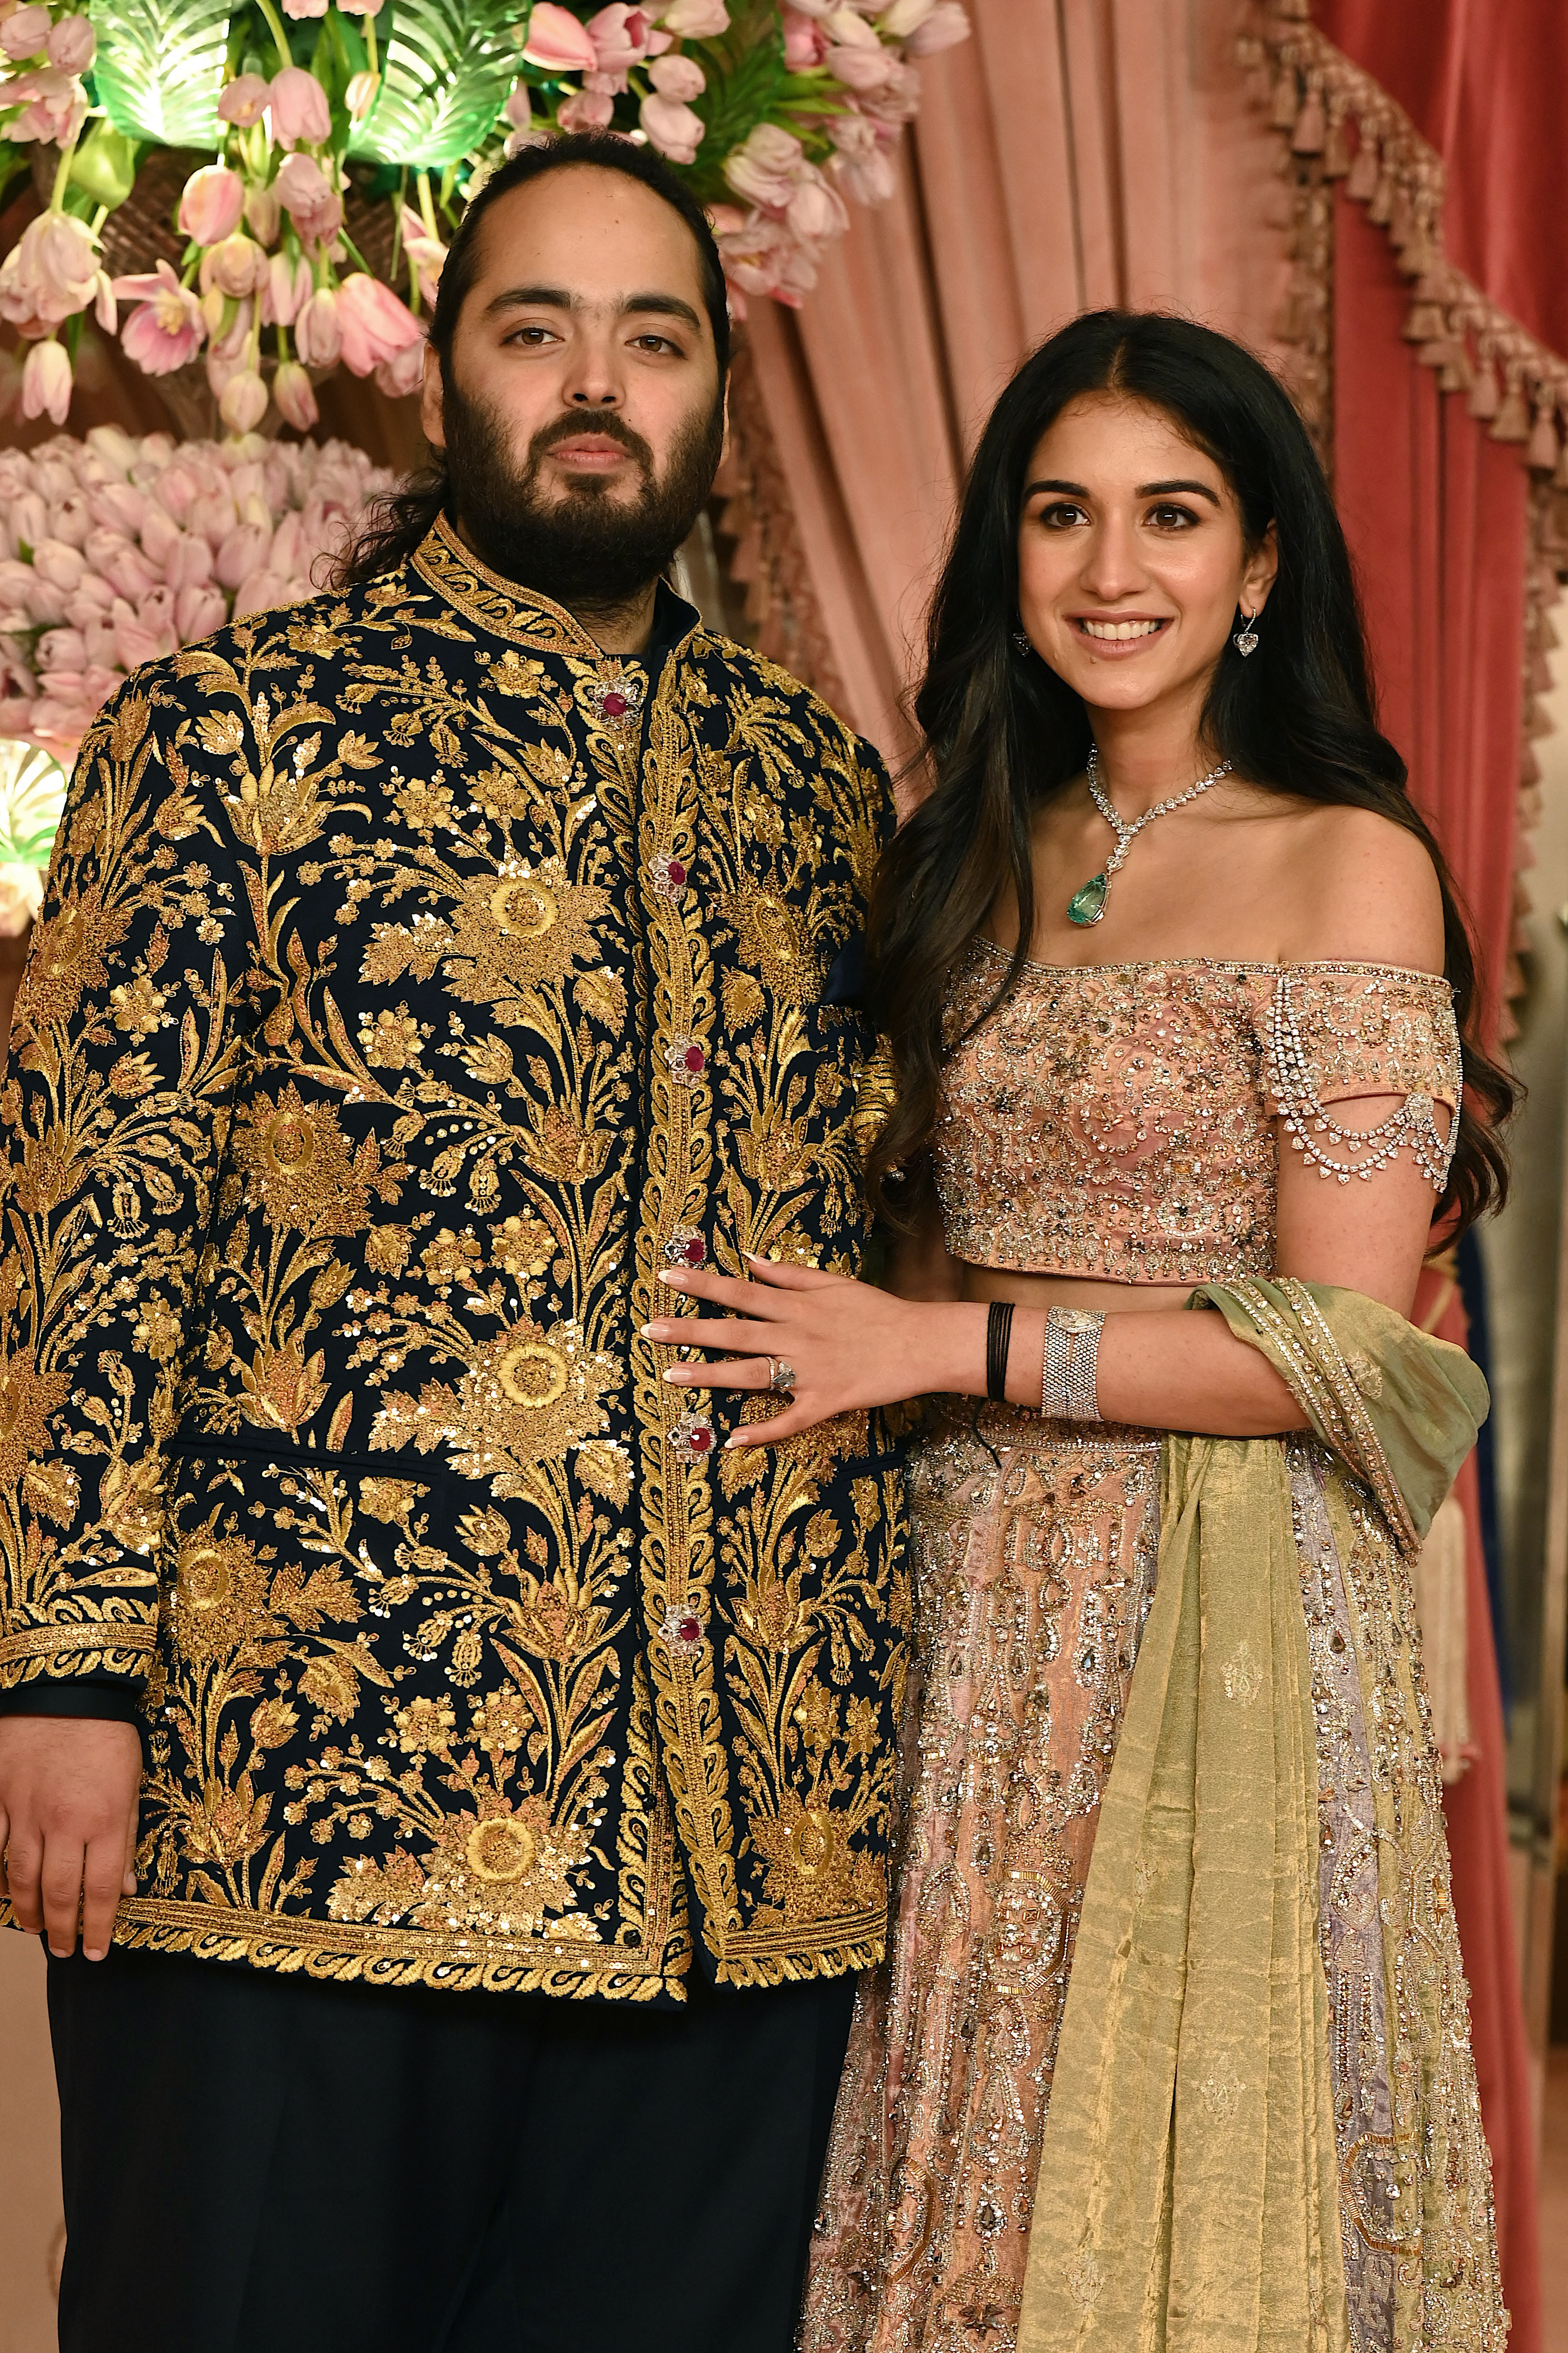 Radhika Merchant (right) is marrying into Asia's most wealthy family